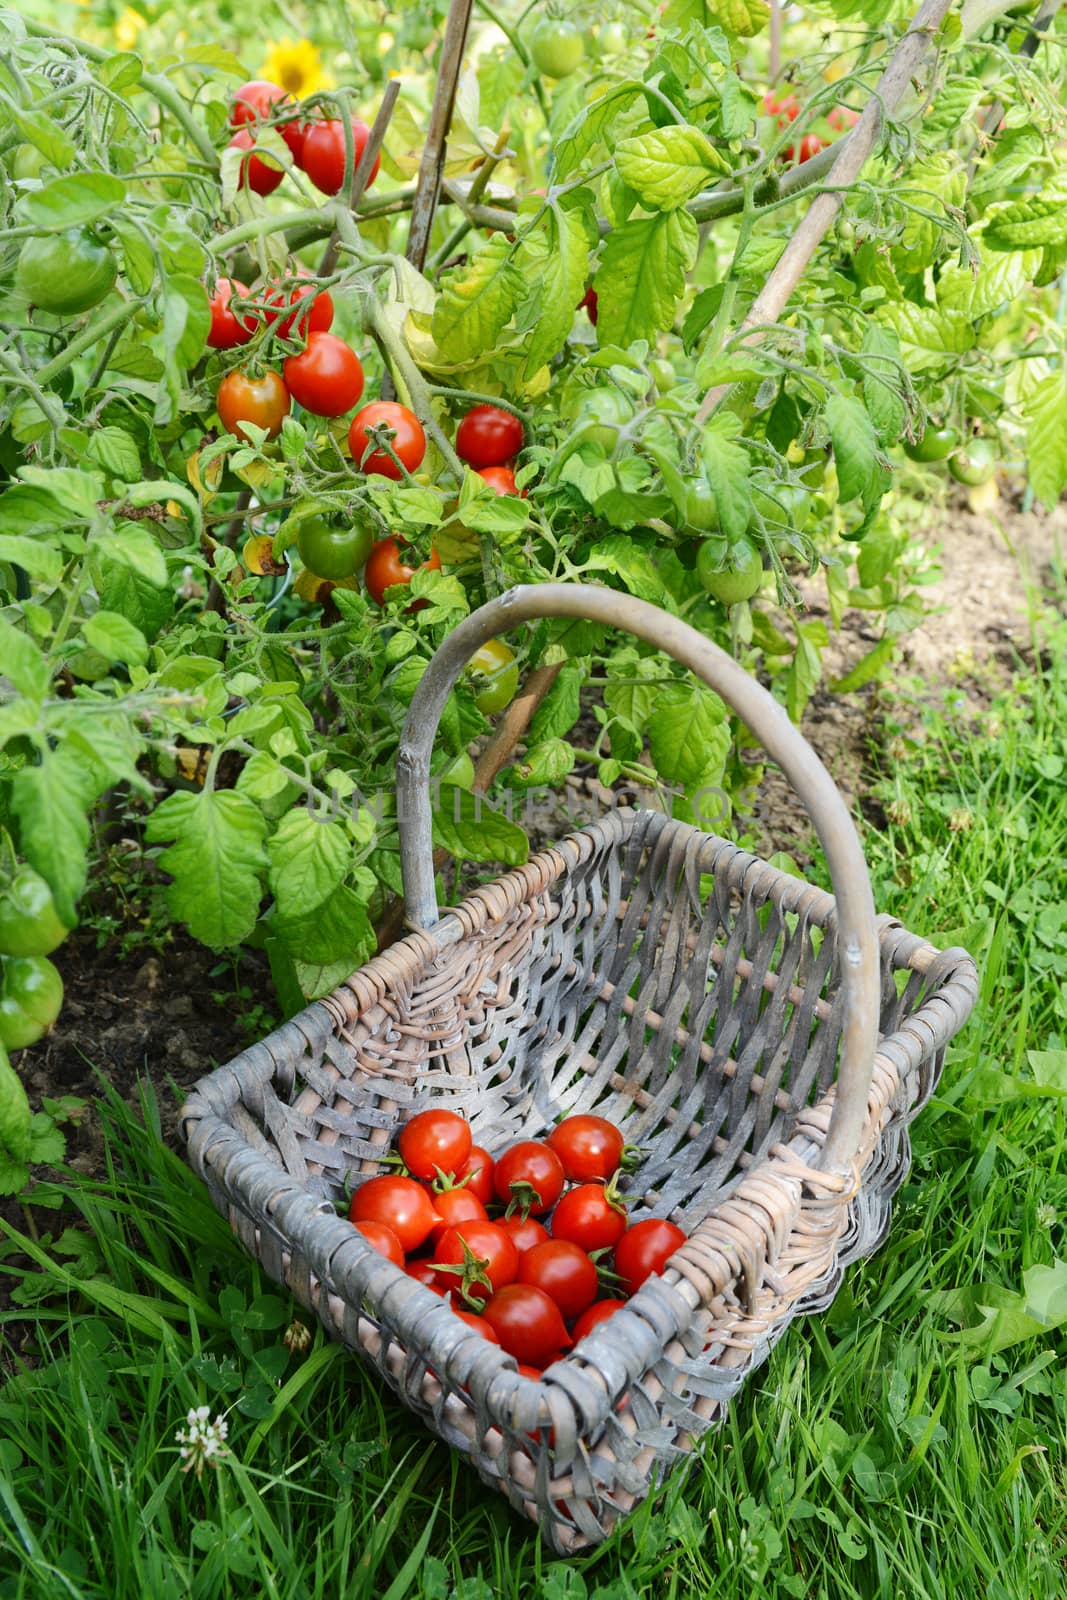 Red cherry tomatoes picked from tomato vines in a vegetable garden, gathered in a woven basket